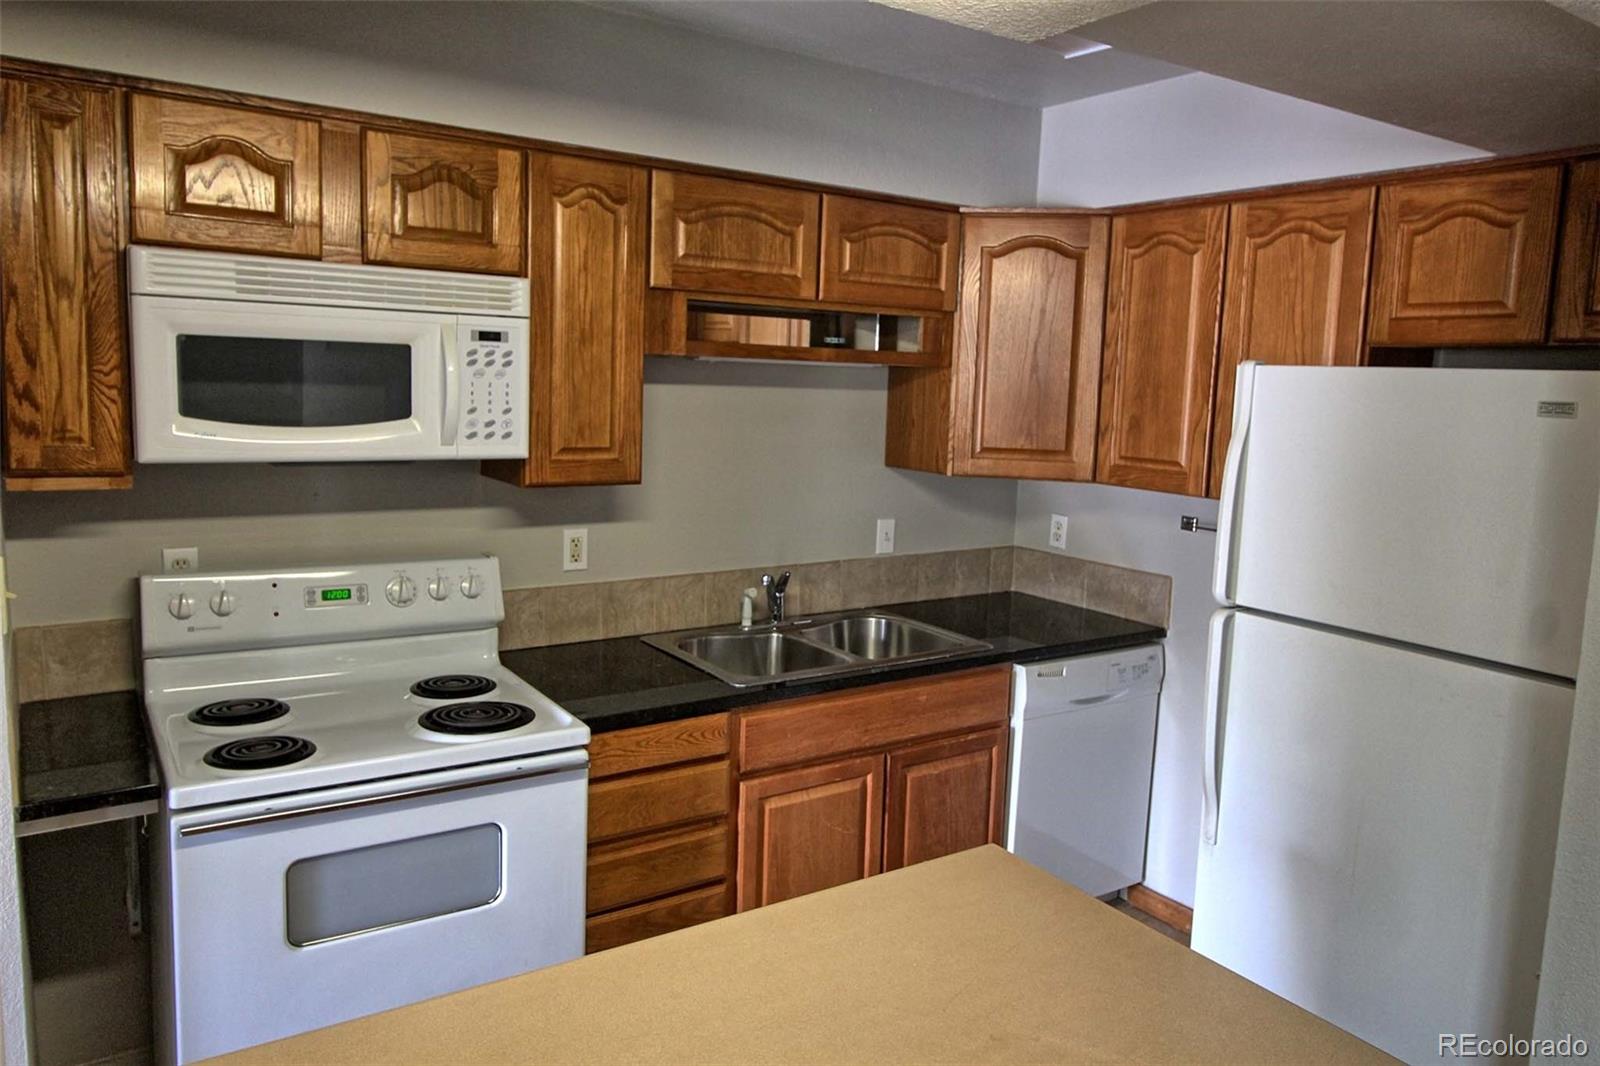 a kitchen with stainless steel appliances granite countertop a refrigerator stove and sink